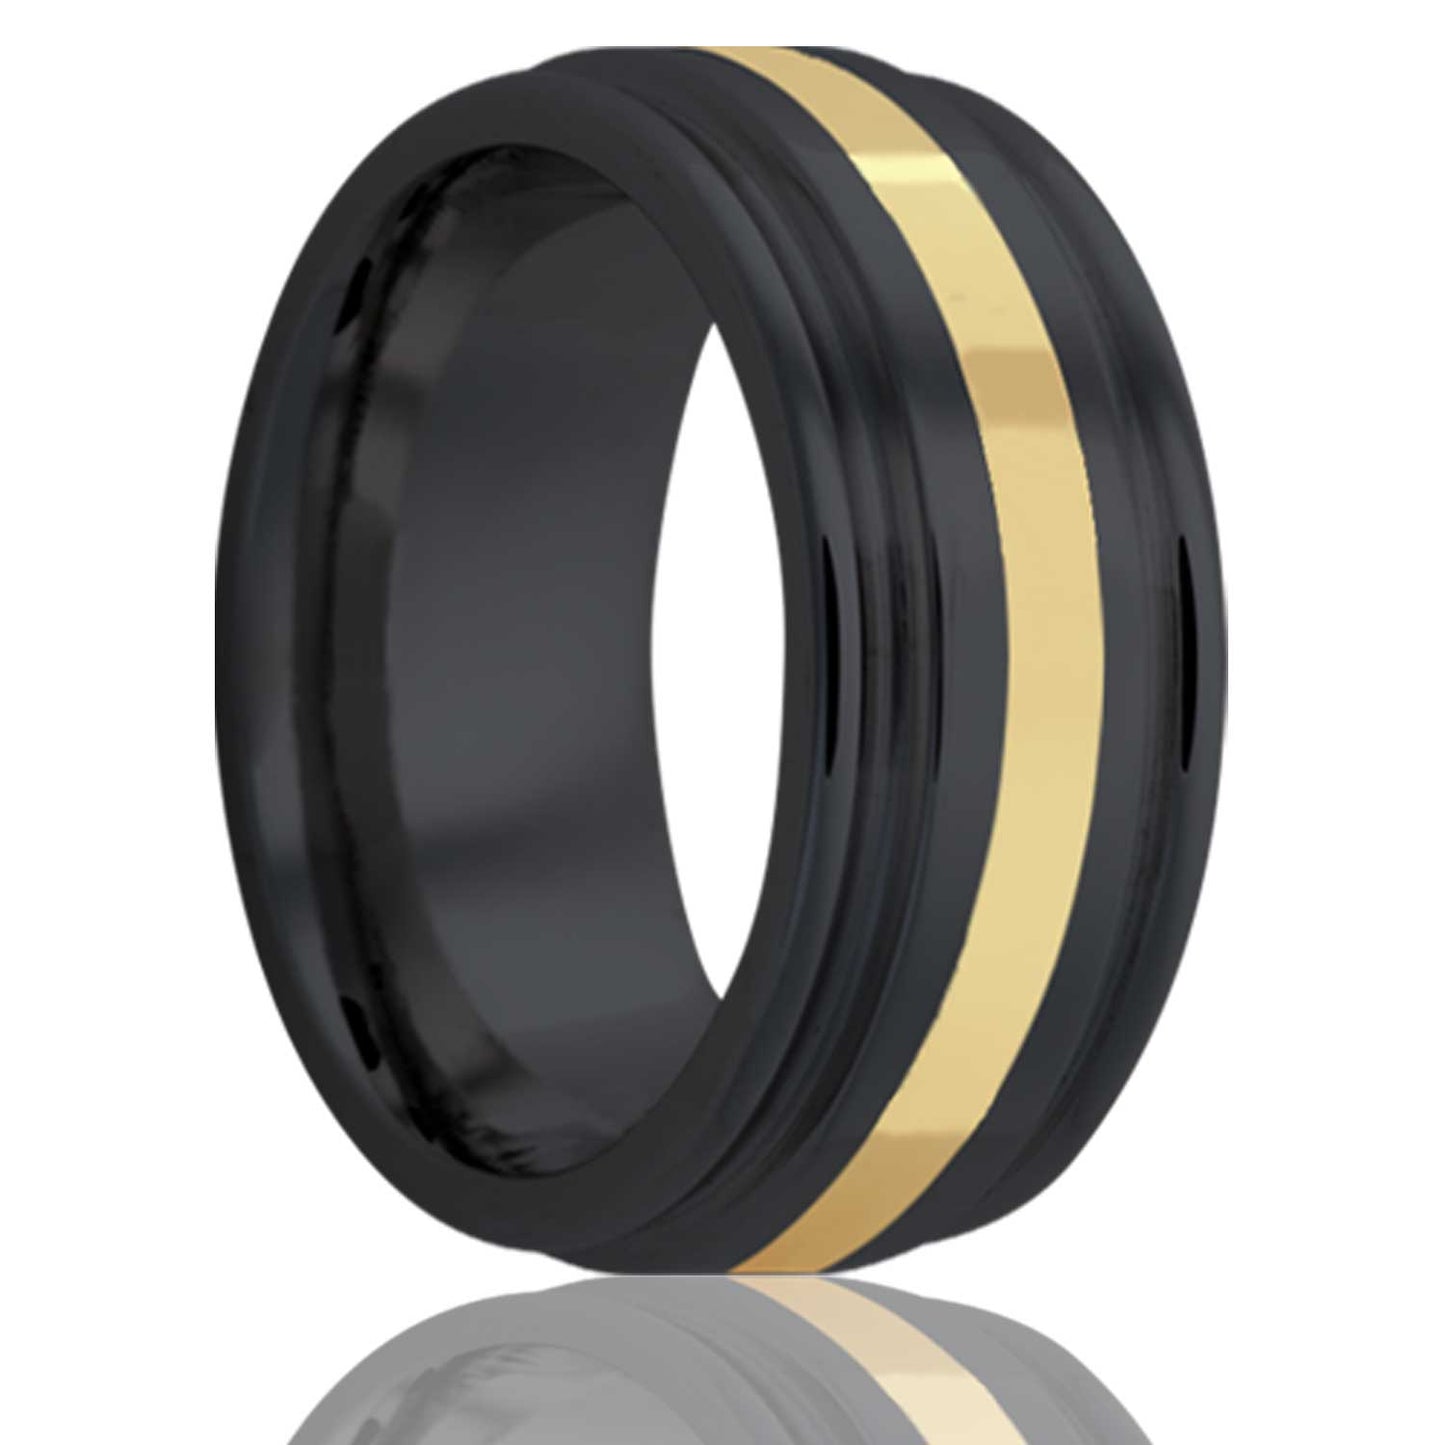 A 14k yellow gold inlay zirconium wedding band with grooved edges displayed on a neutral white background.